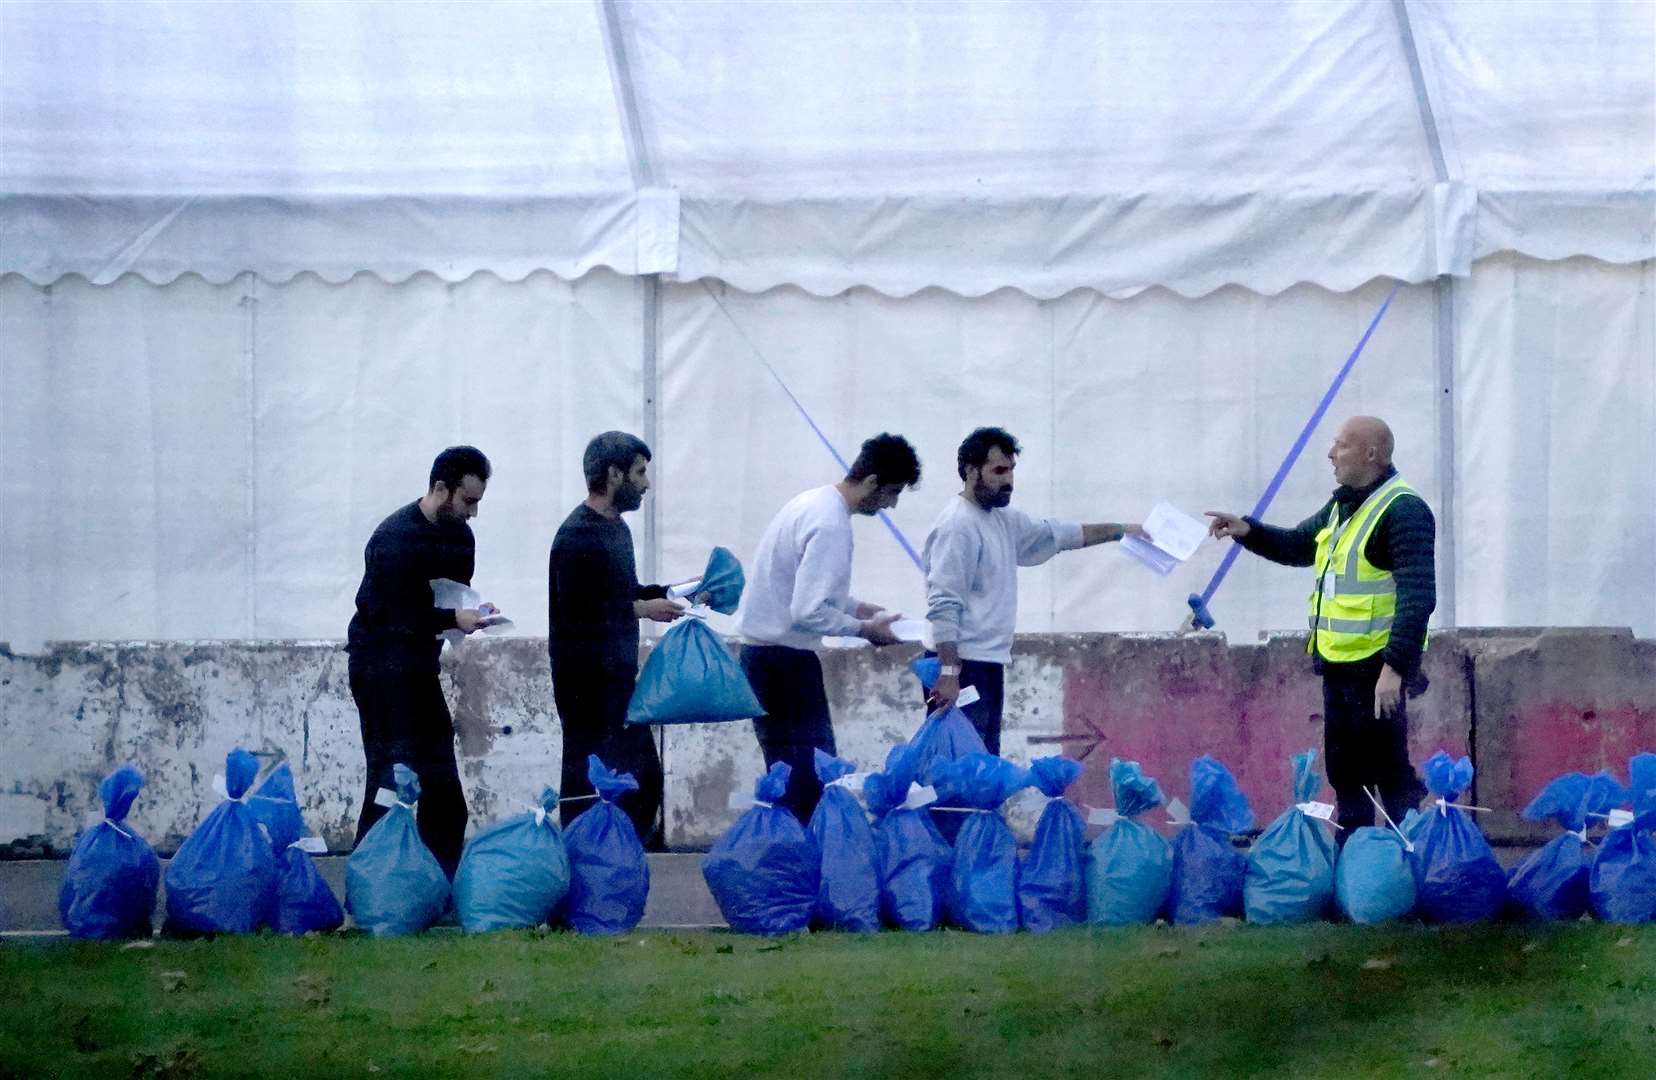 A group of people thought to be migrants gather their belongings before leaving the Manston immigration short-term holding facility (Gareth Fuller/PA)